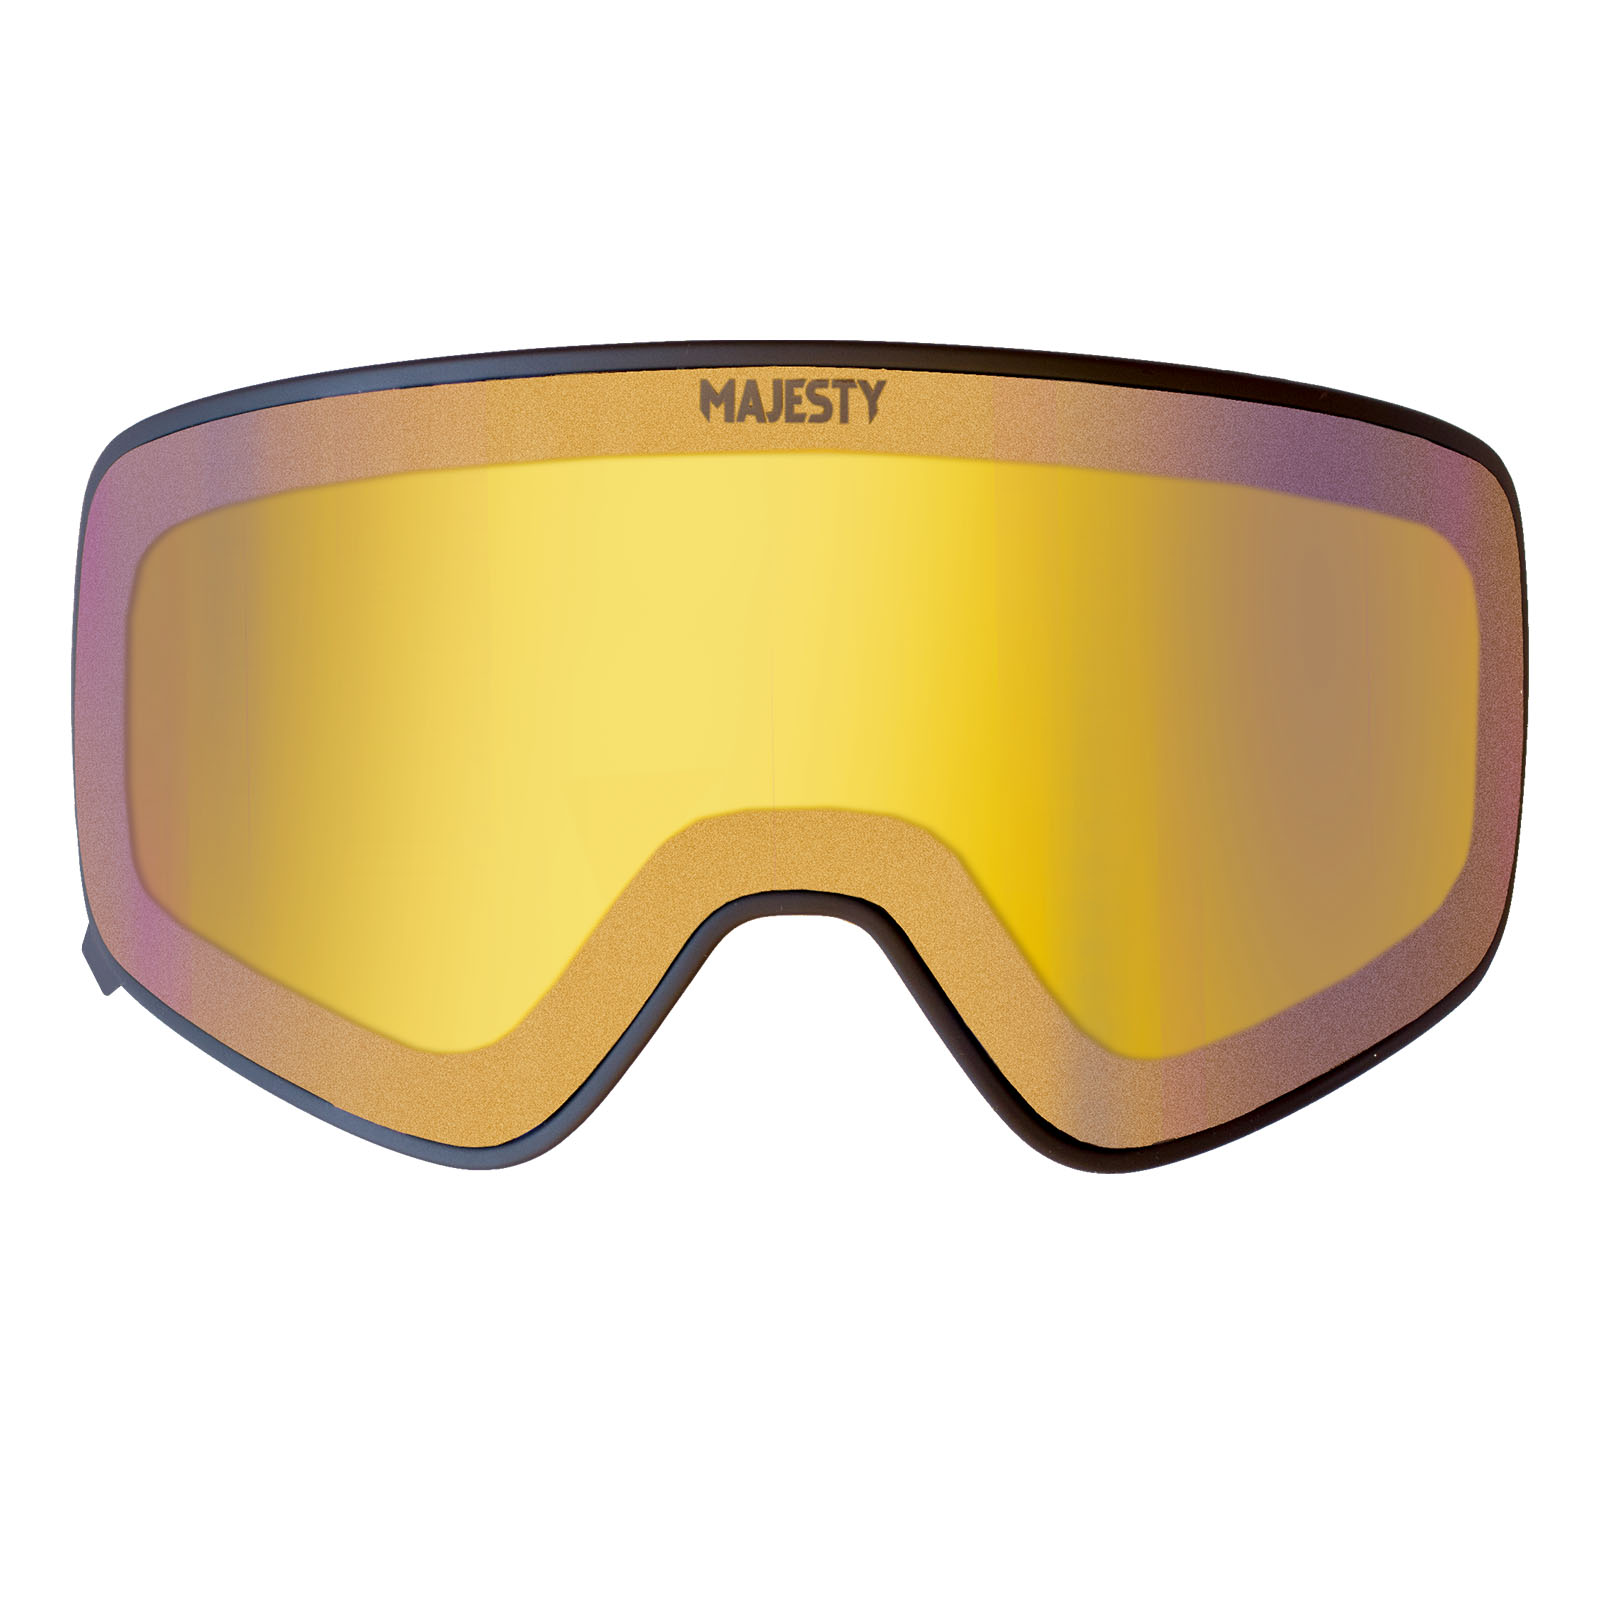 MAJESTY The Force + SKIS Online MAJESTY lens - pearl XENON - Skis C Store black Moonstone MAJESTY black Ski HD Magnetic Goggles - frame Official 